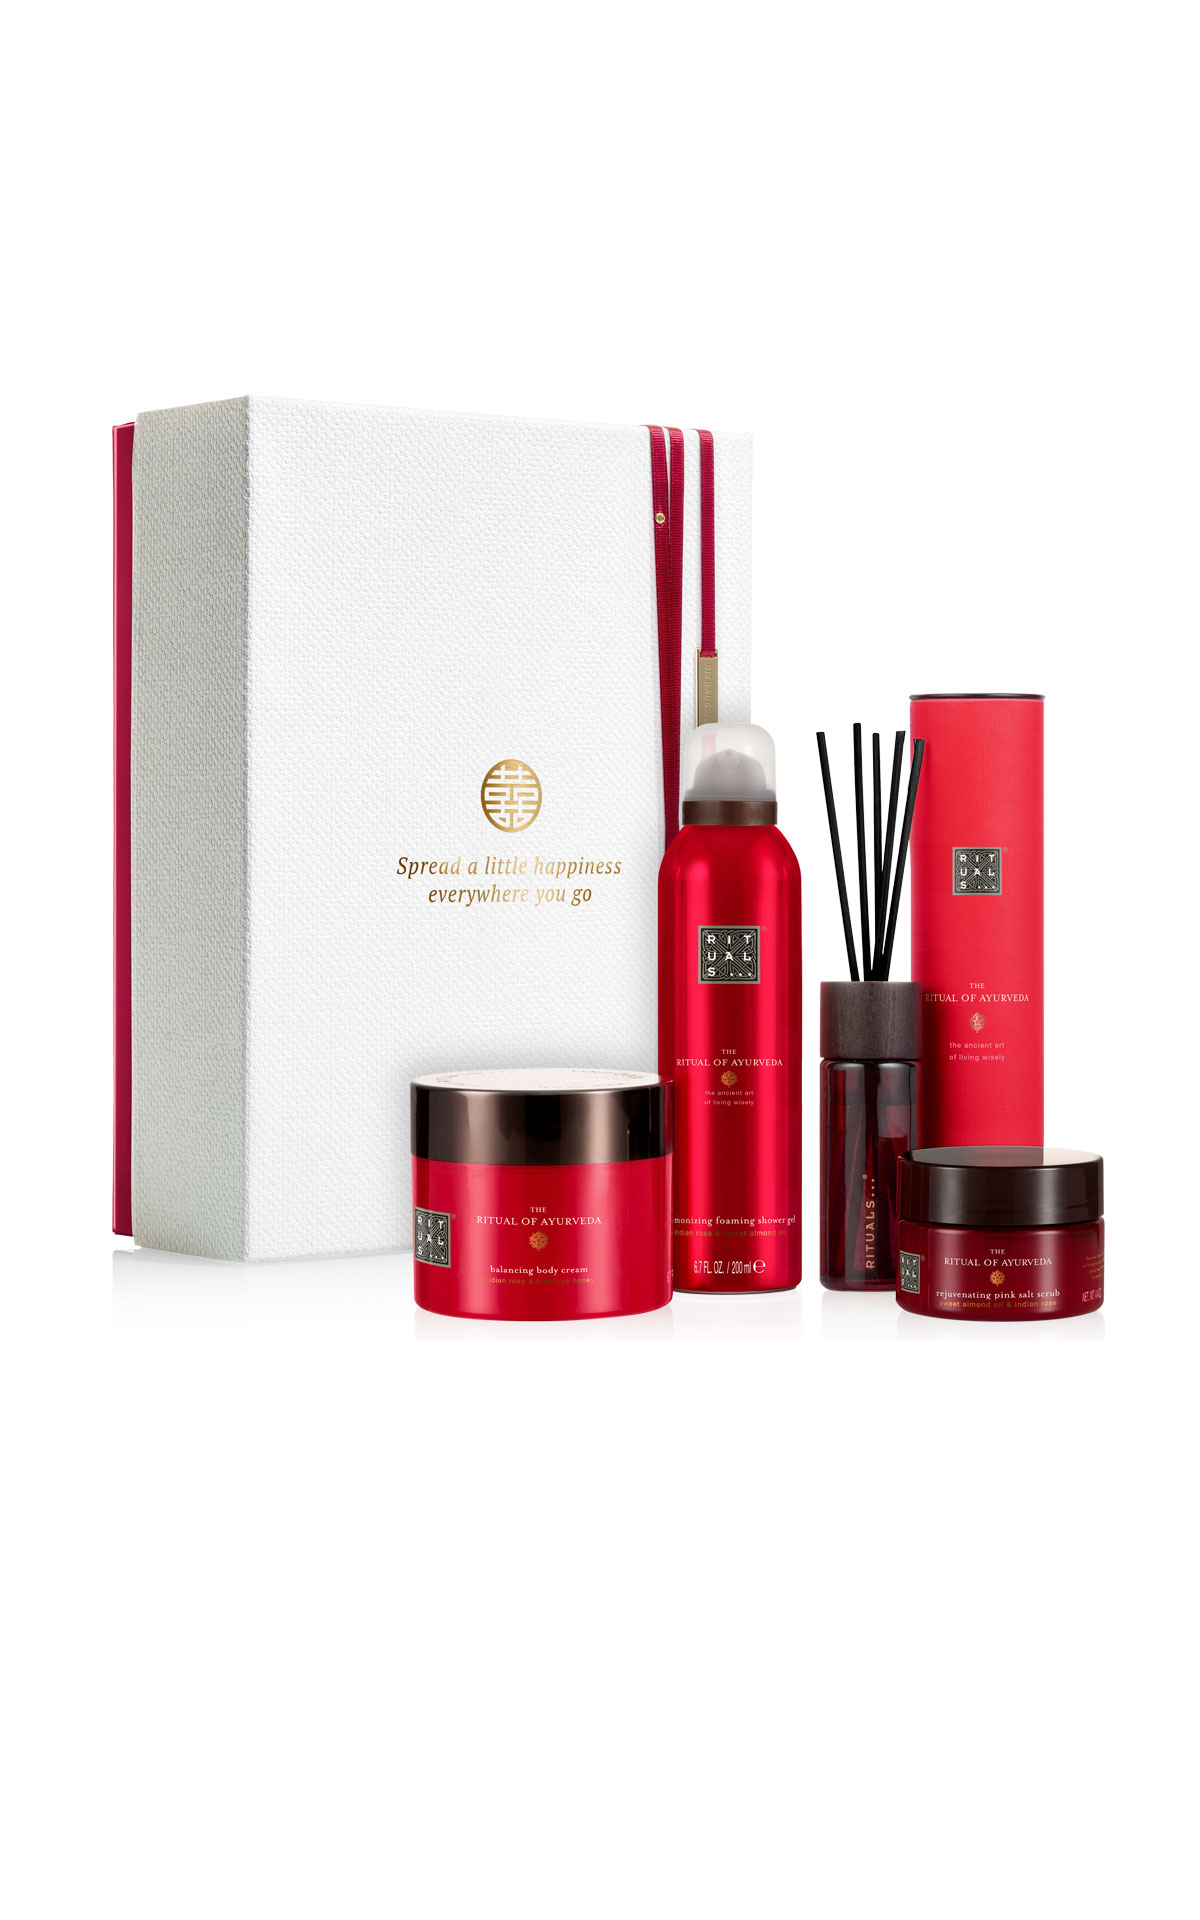 Rituals The ritual of ayurveda balancing collection giftset from Bicester Village